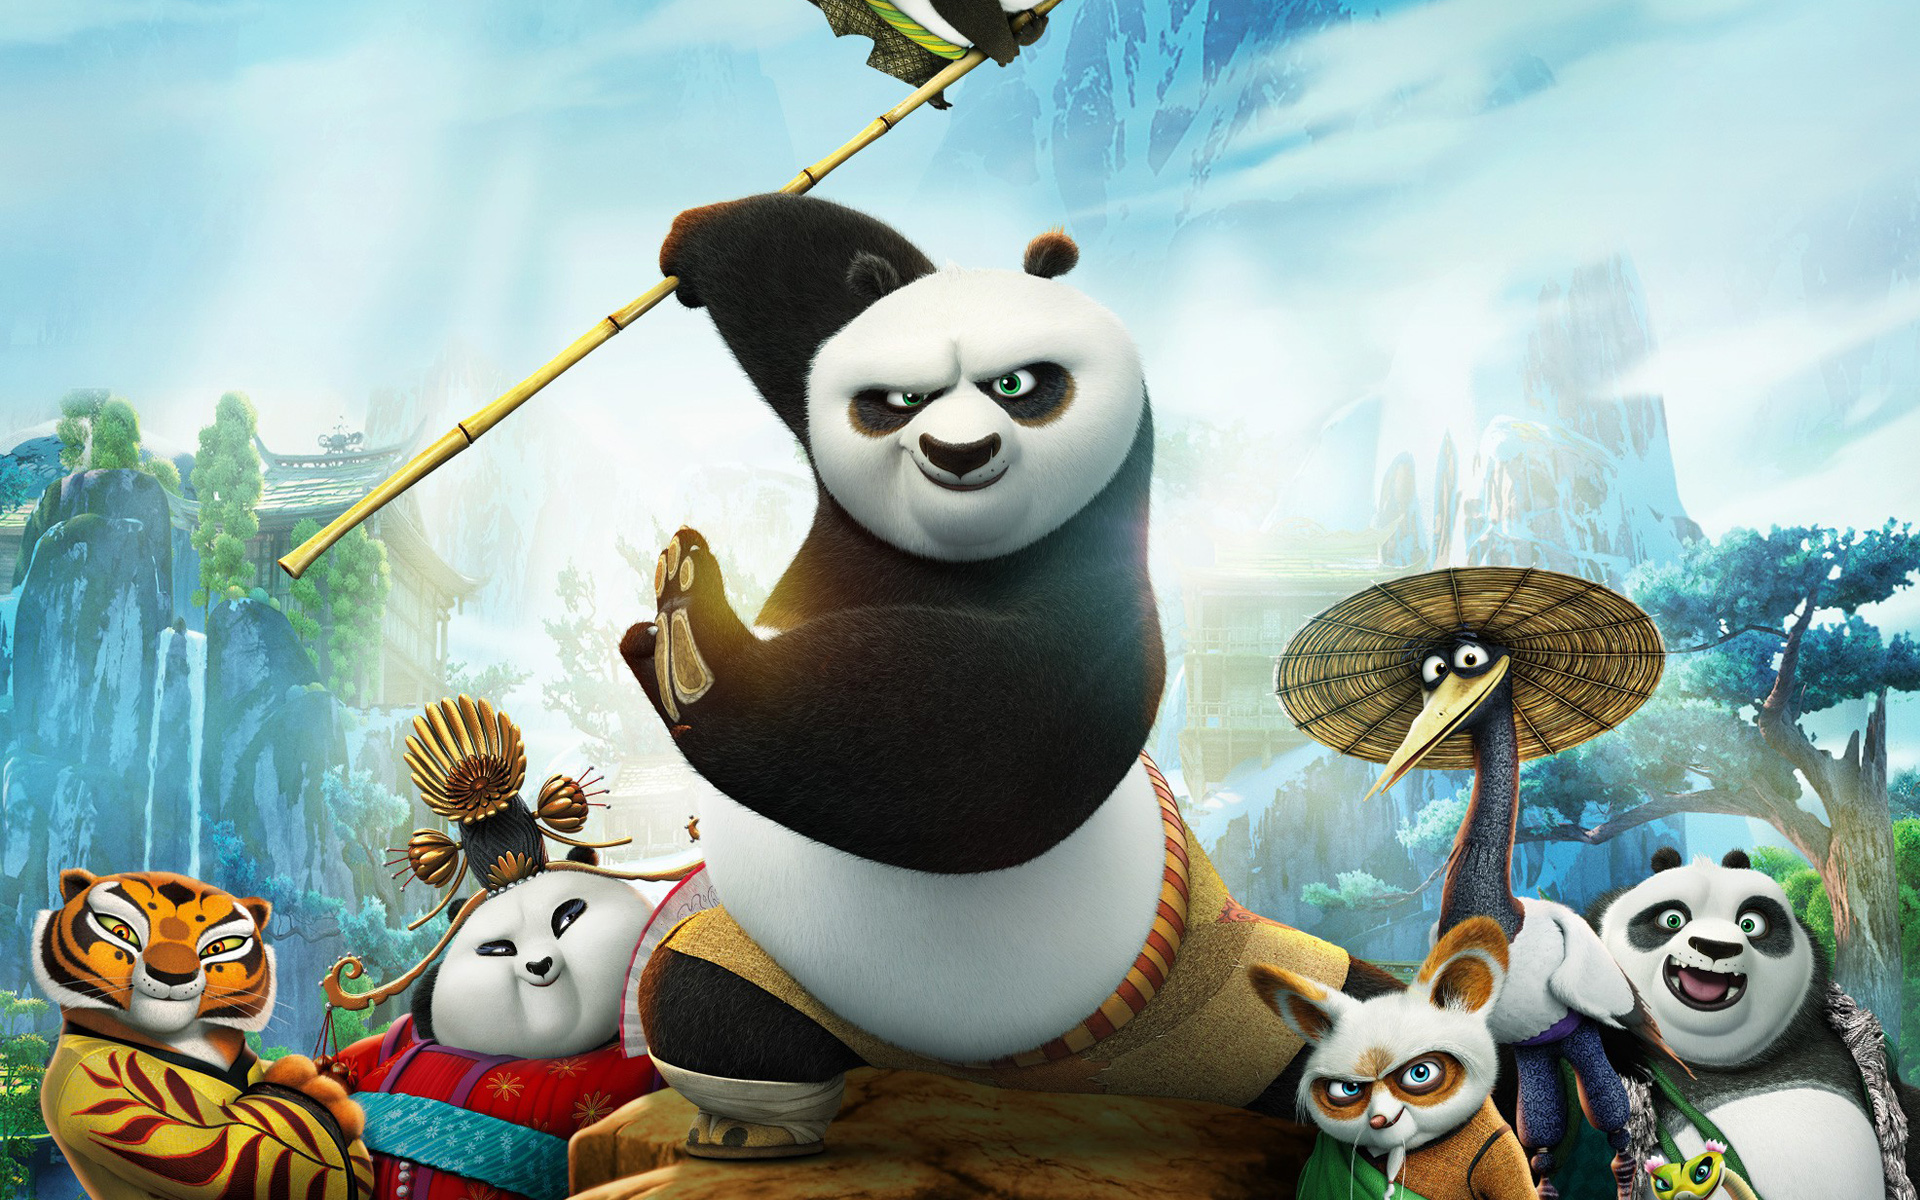 388614 free wallpaper 320x480 for phone, download images kung fu panda, po (kung fu panda), kung fu panda 3, movie 320x480 for mobile